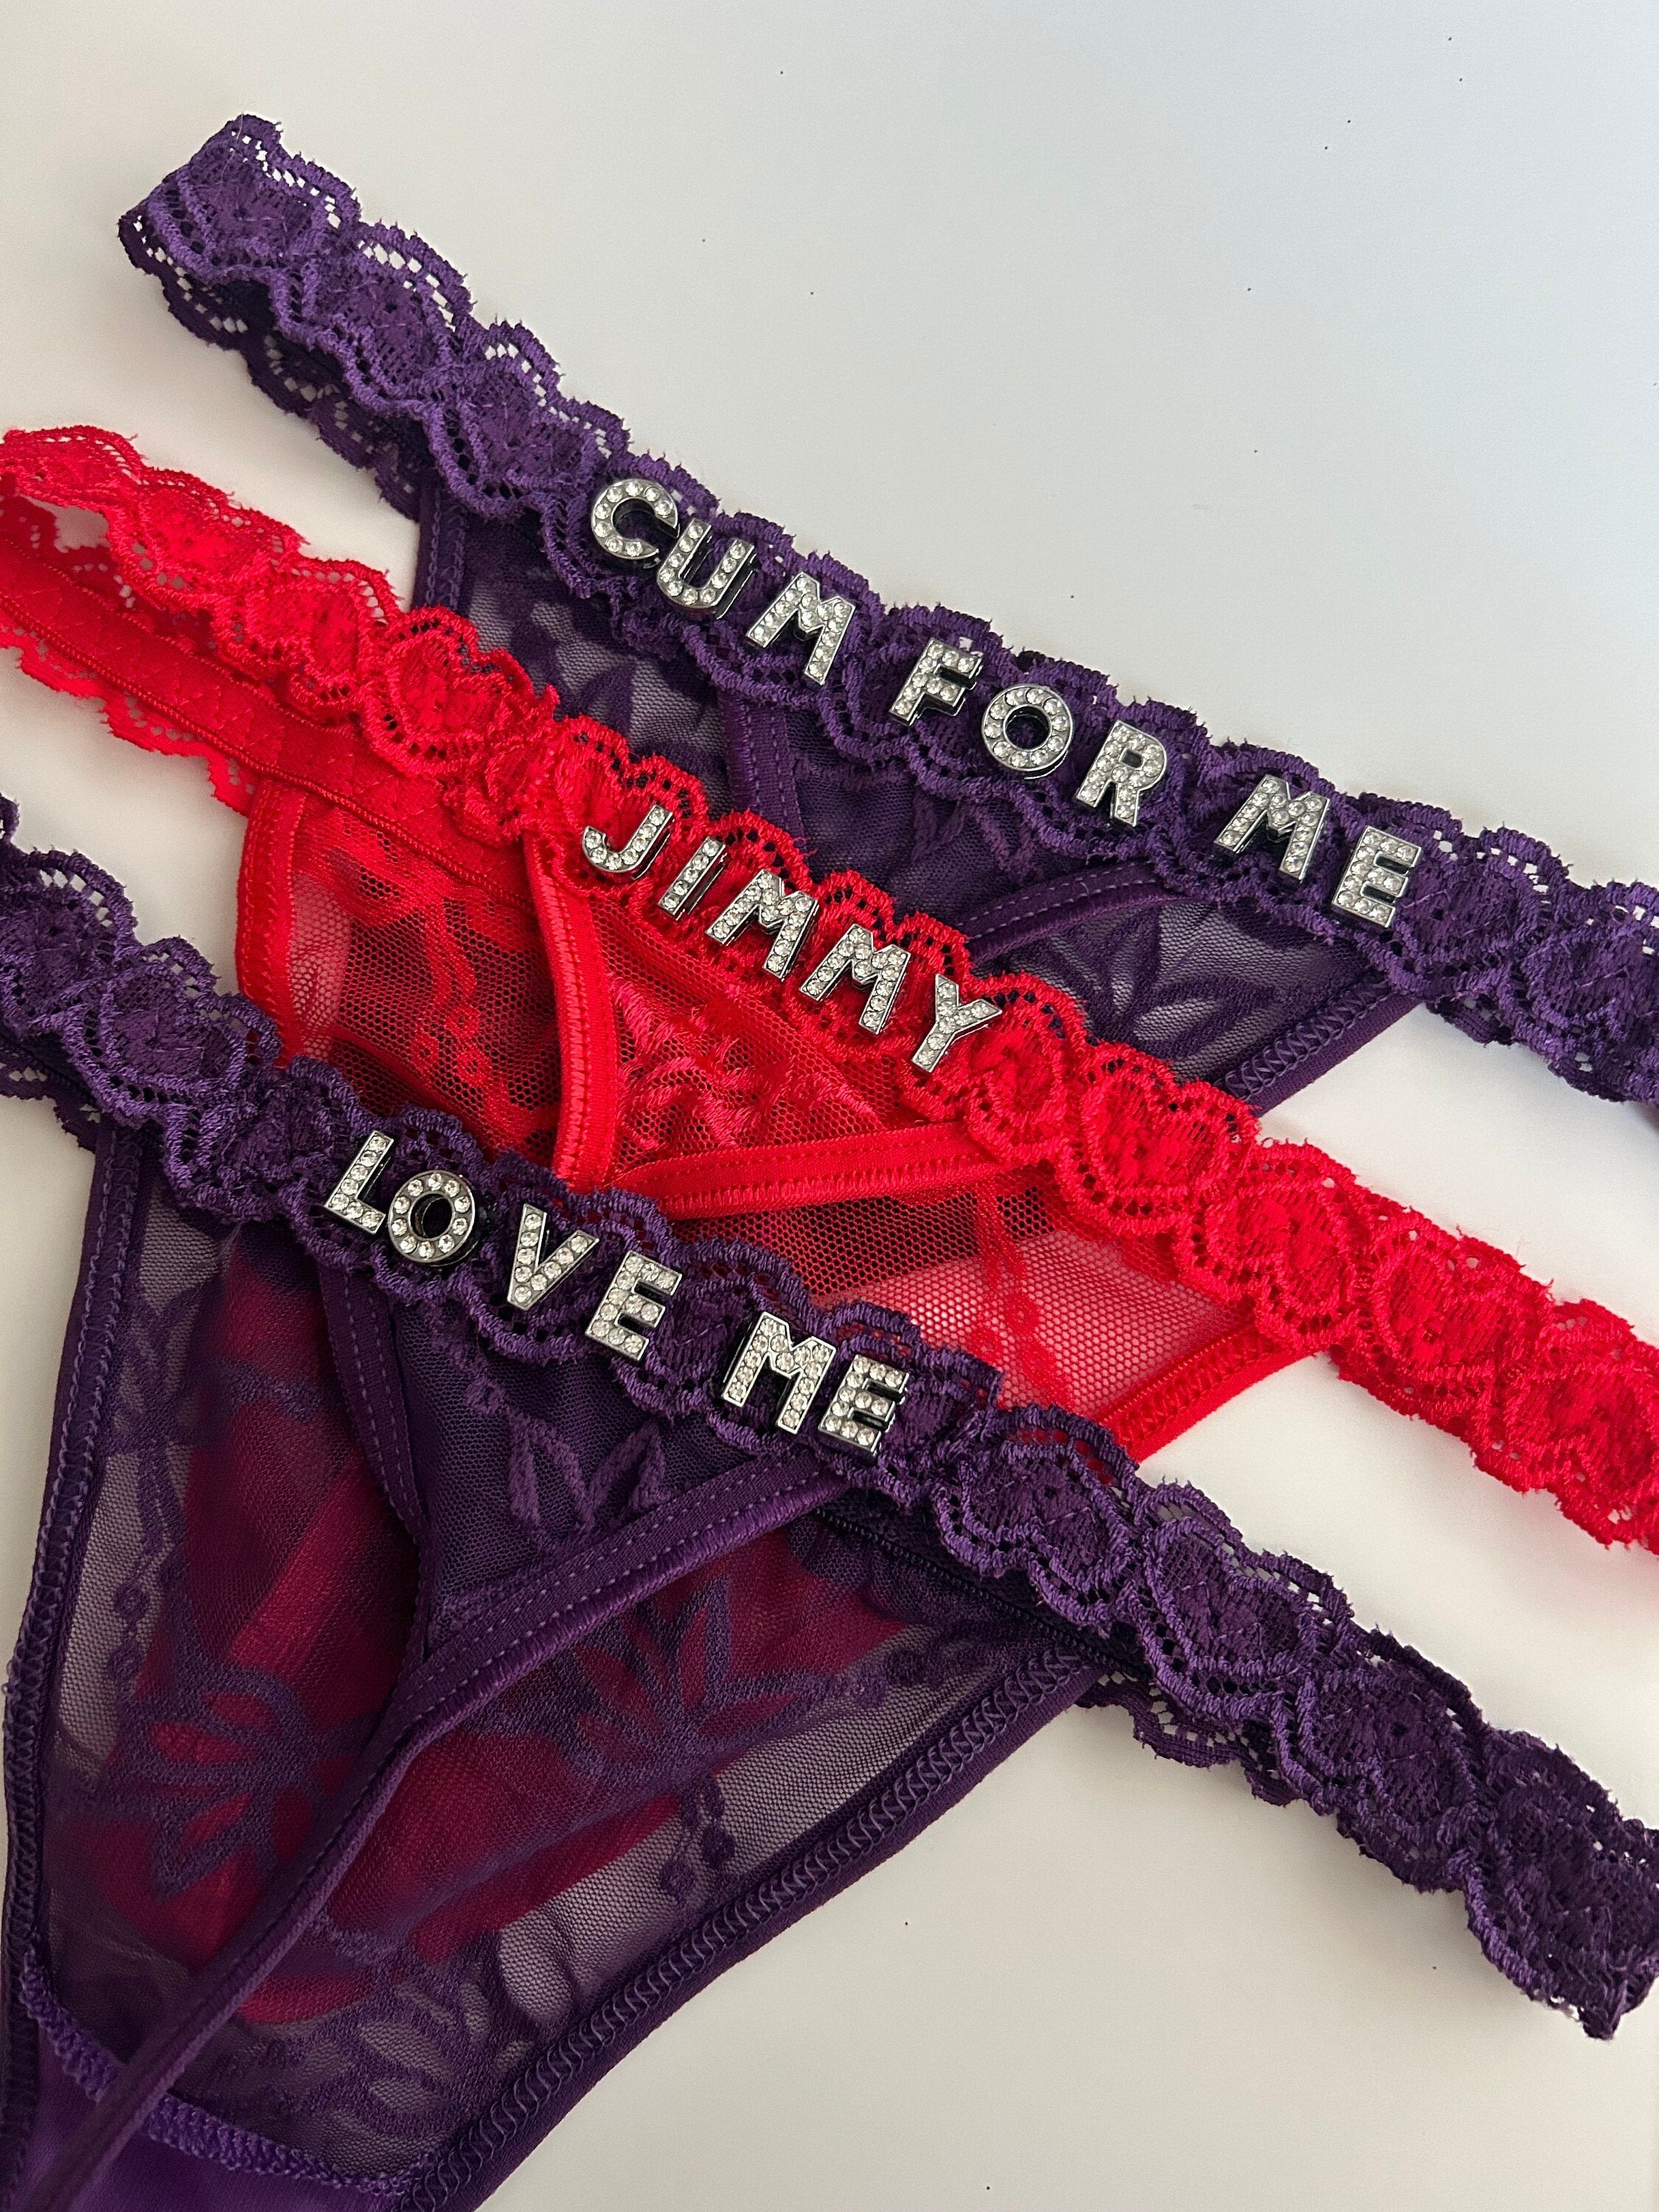 Surprise Your Partner with a Personalized Name Thong!